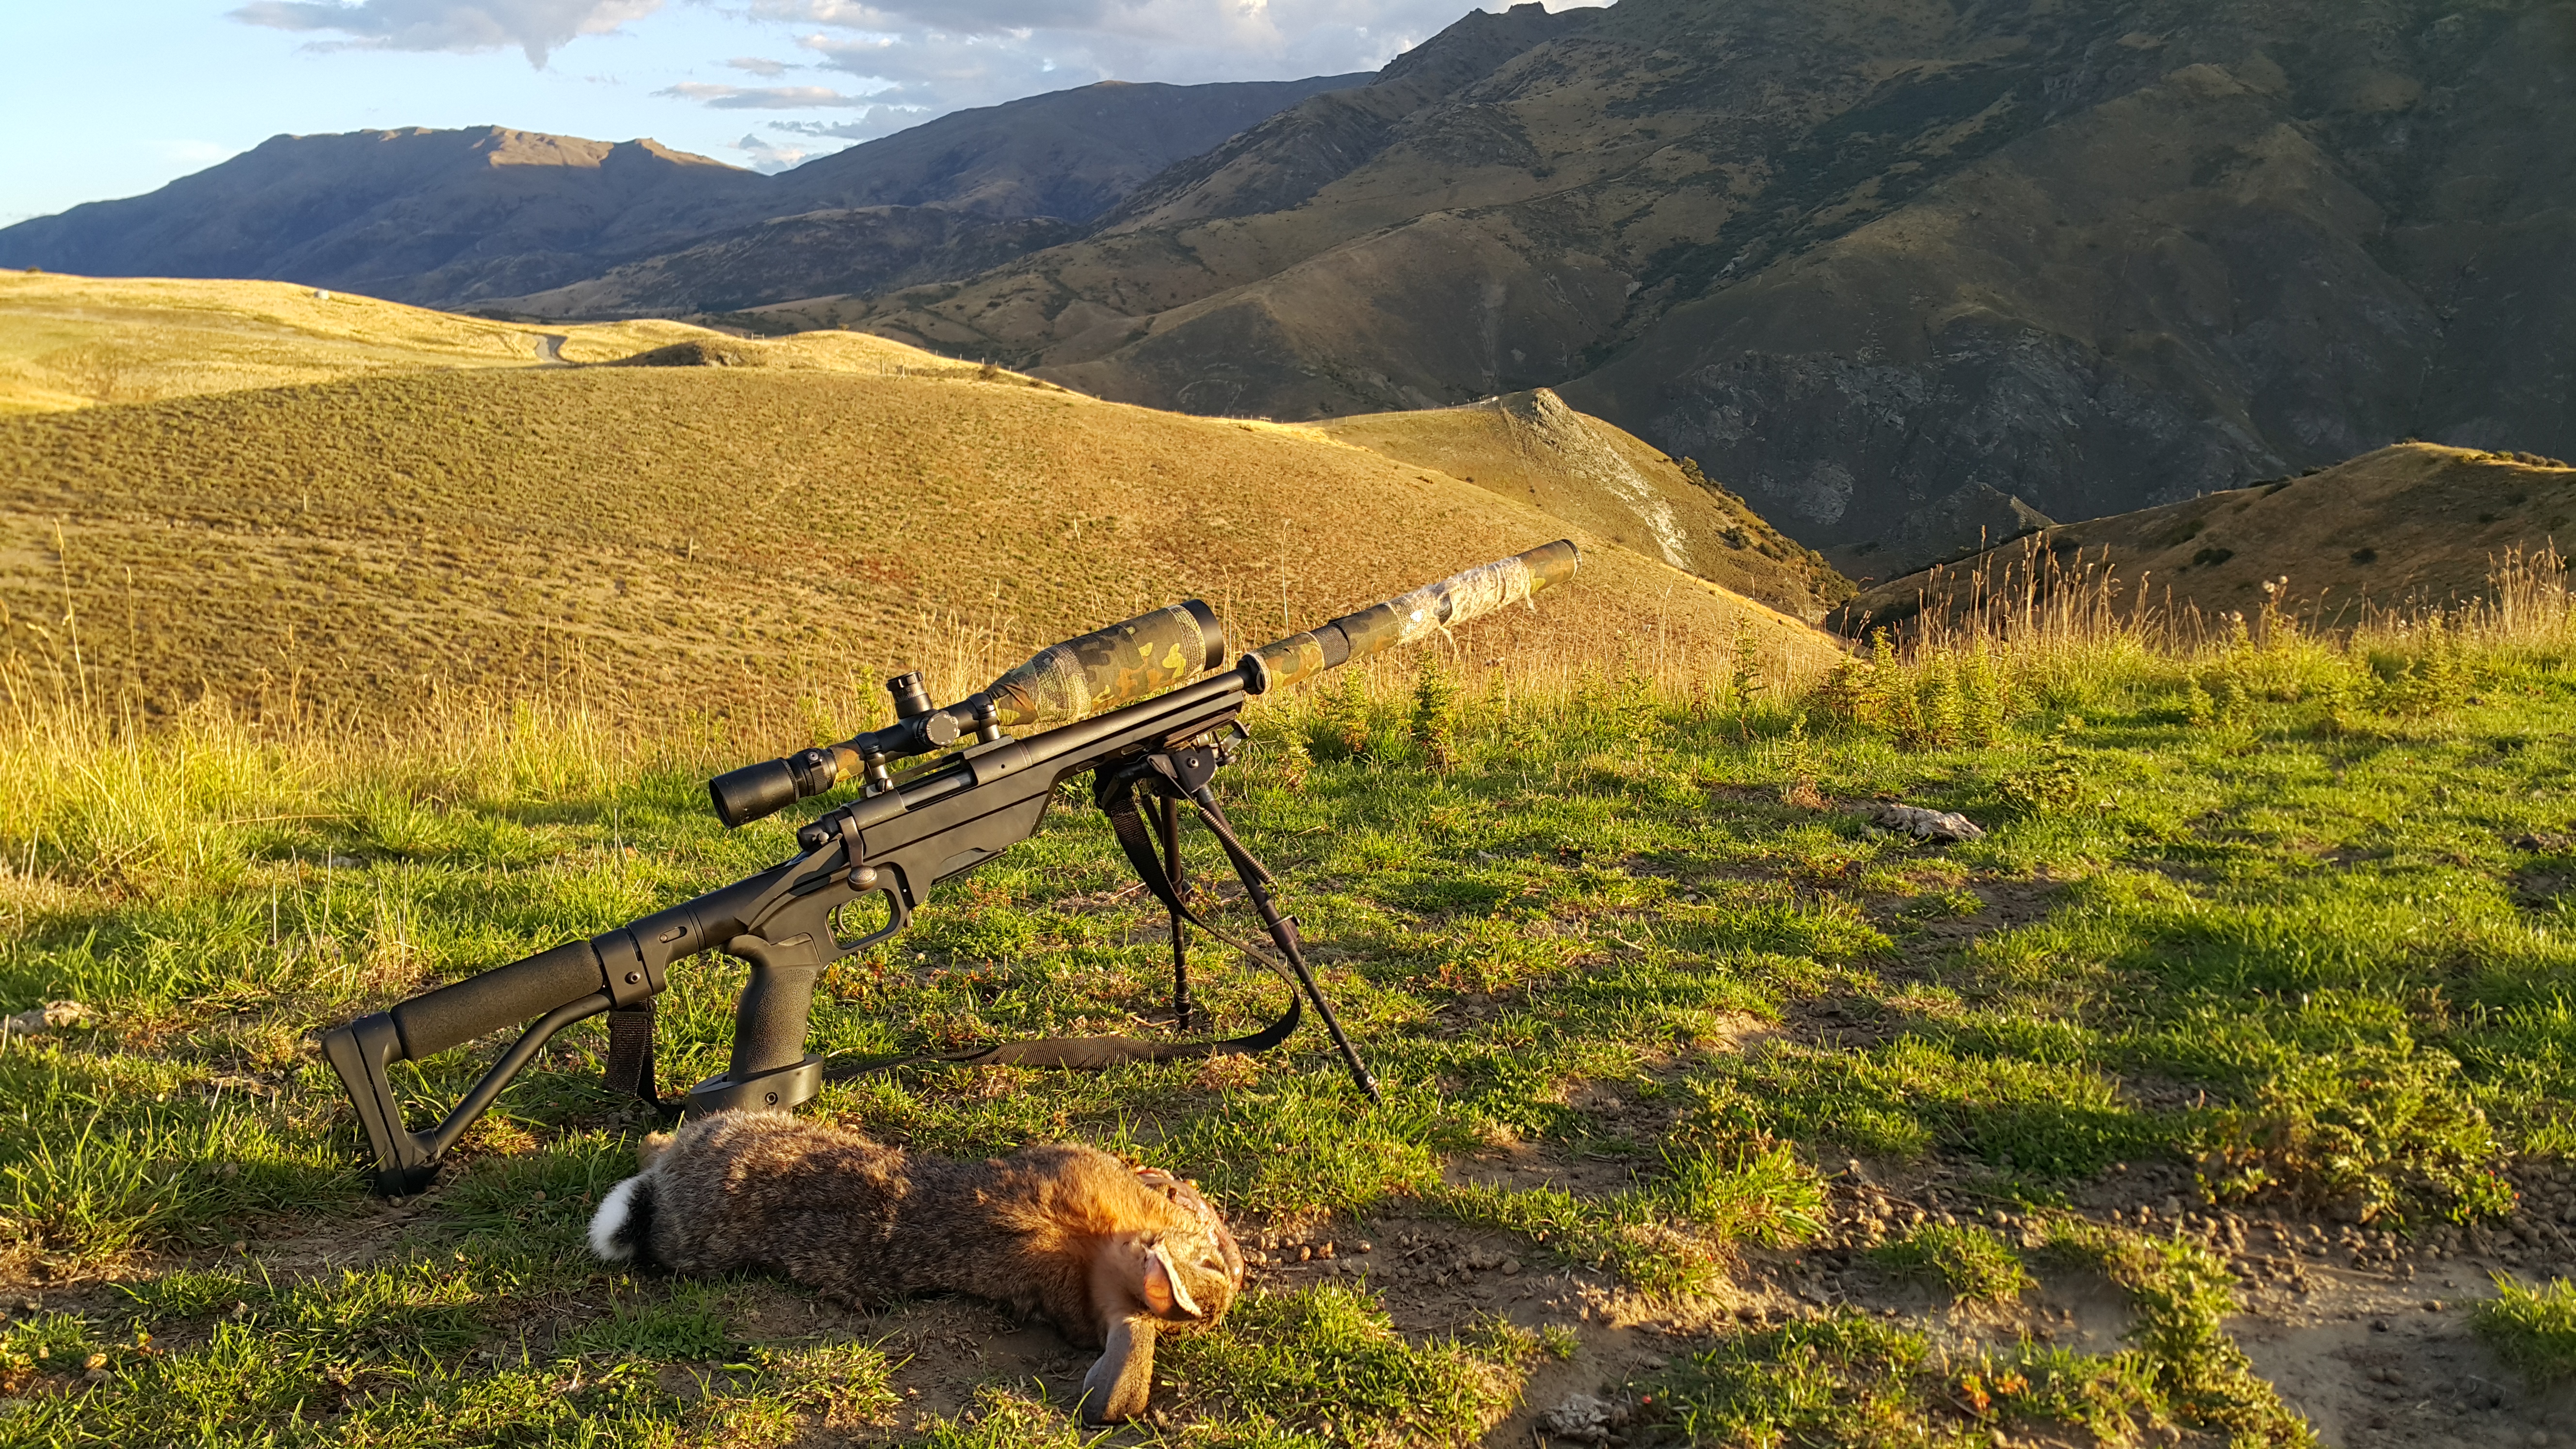 https://www.nzhuntingandshooting.co.nz/attachments/f11/189980d1644571748-what-little-pesties-did-you-bowl-over-today-20220211_202308.jpg